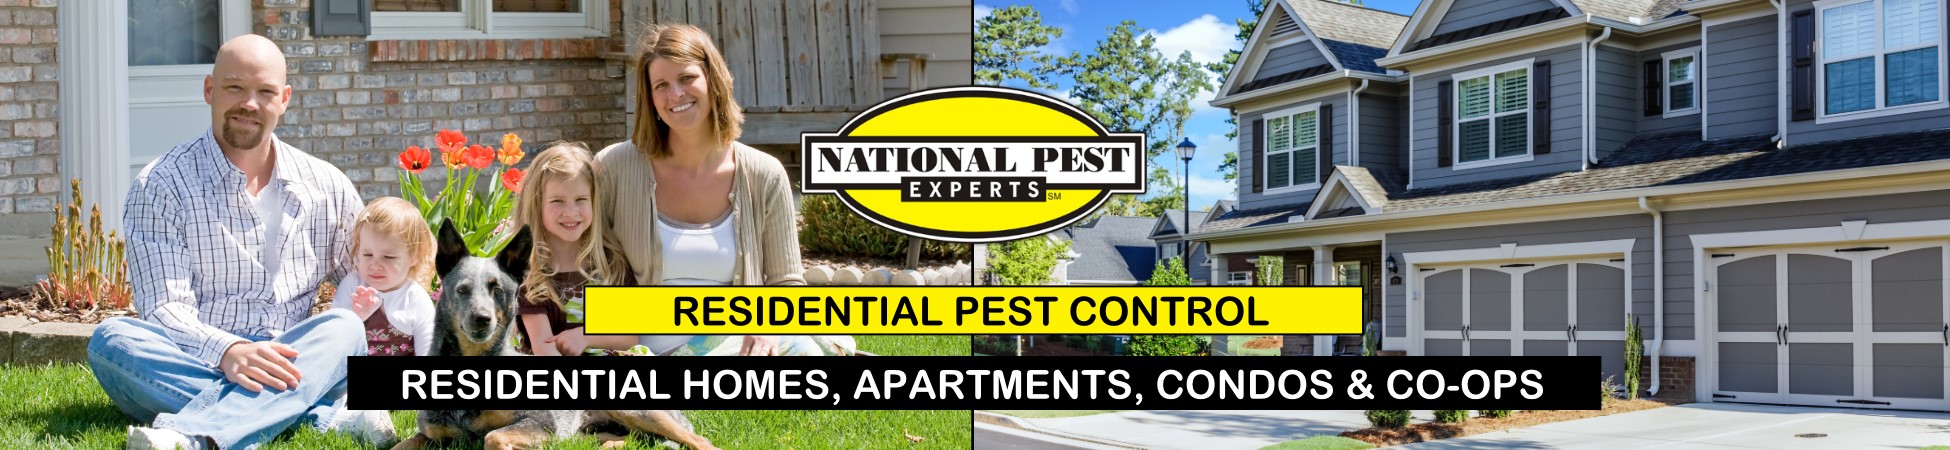 National Pest Experts - Residential exterminating and pest control in Village Of The Branch, NY